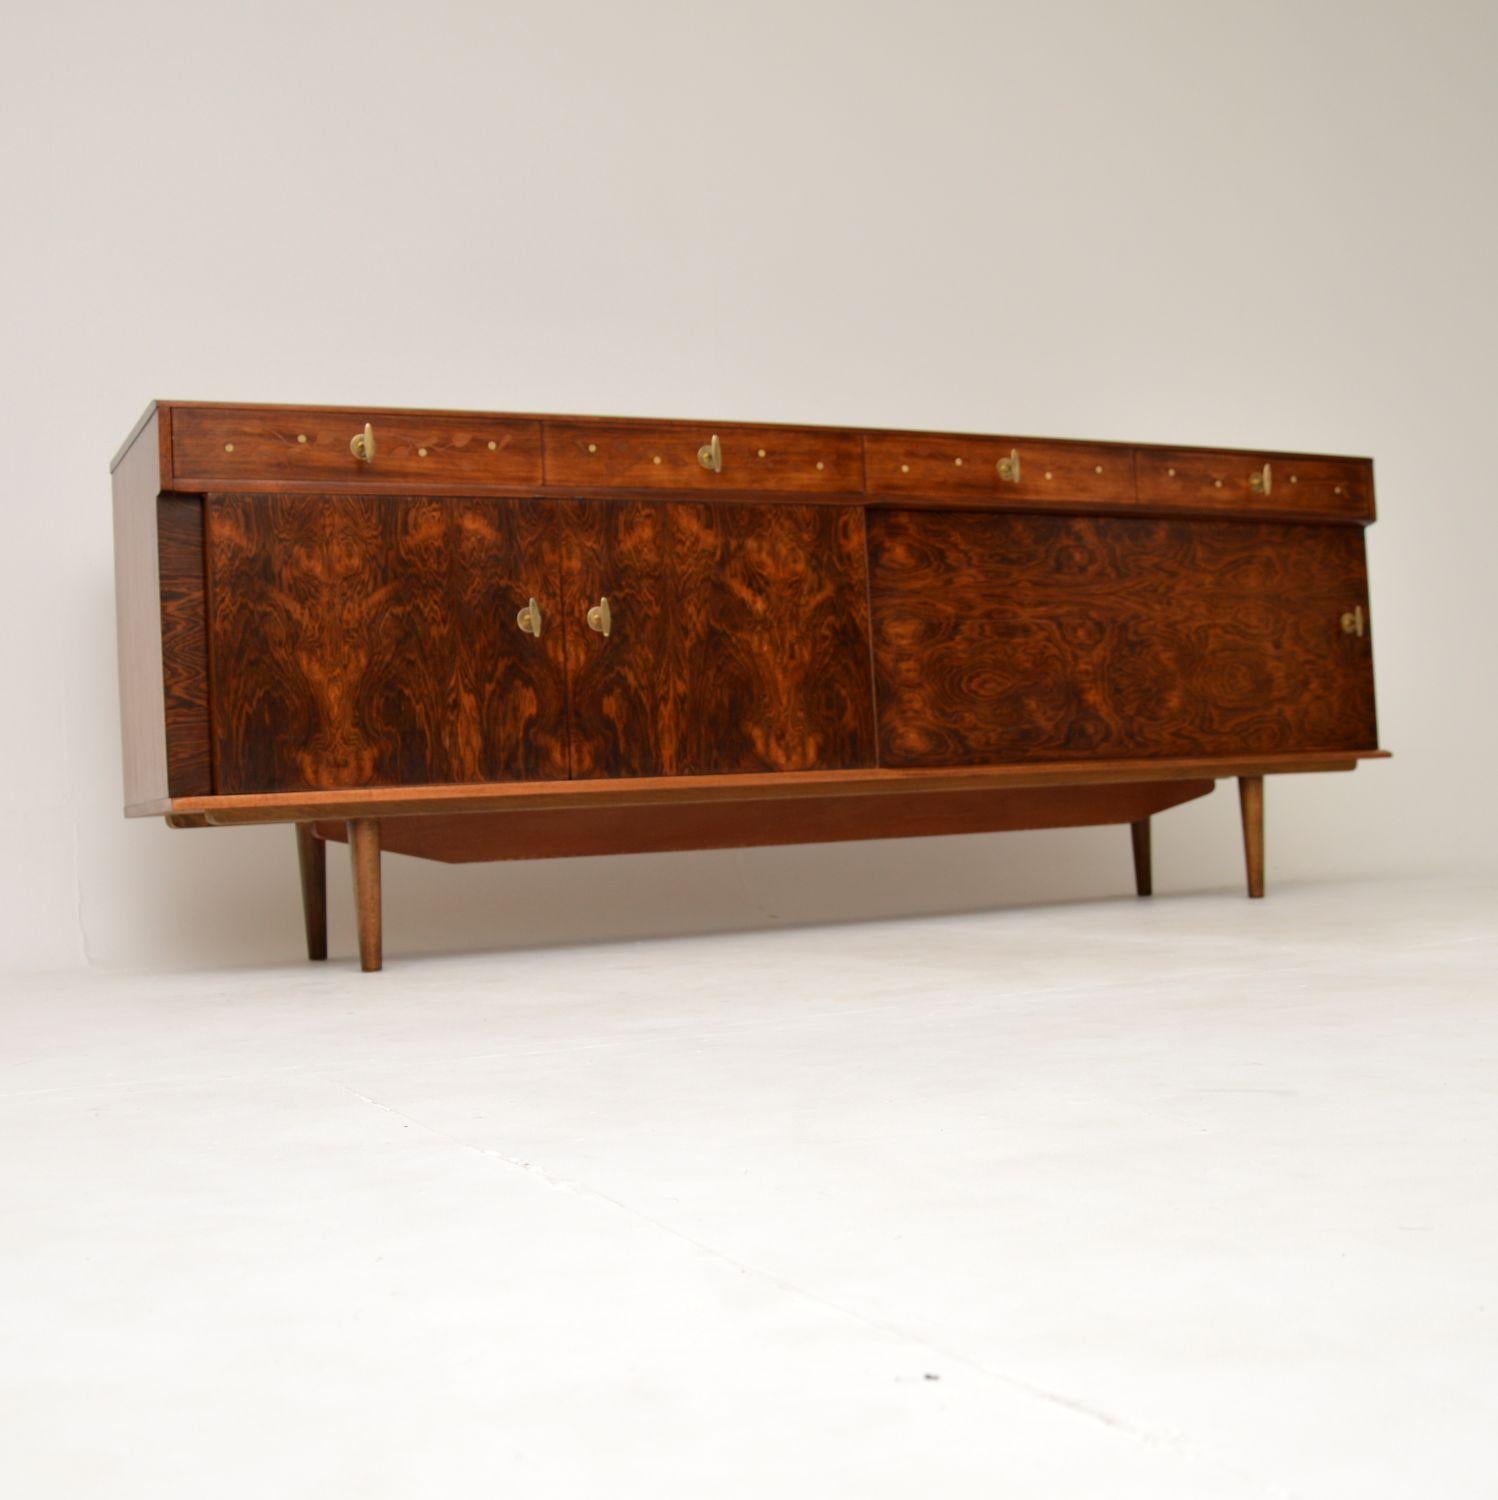 An absolutely stunning and extremely rare sideboard. This was made in England by Everest, it dates from the 1960’s. It was most likely designed by Andrew Milne, he was known to have worked with Everest around this period and it certainly has the